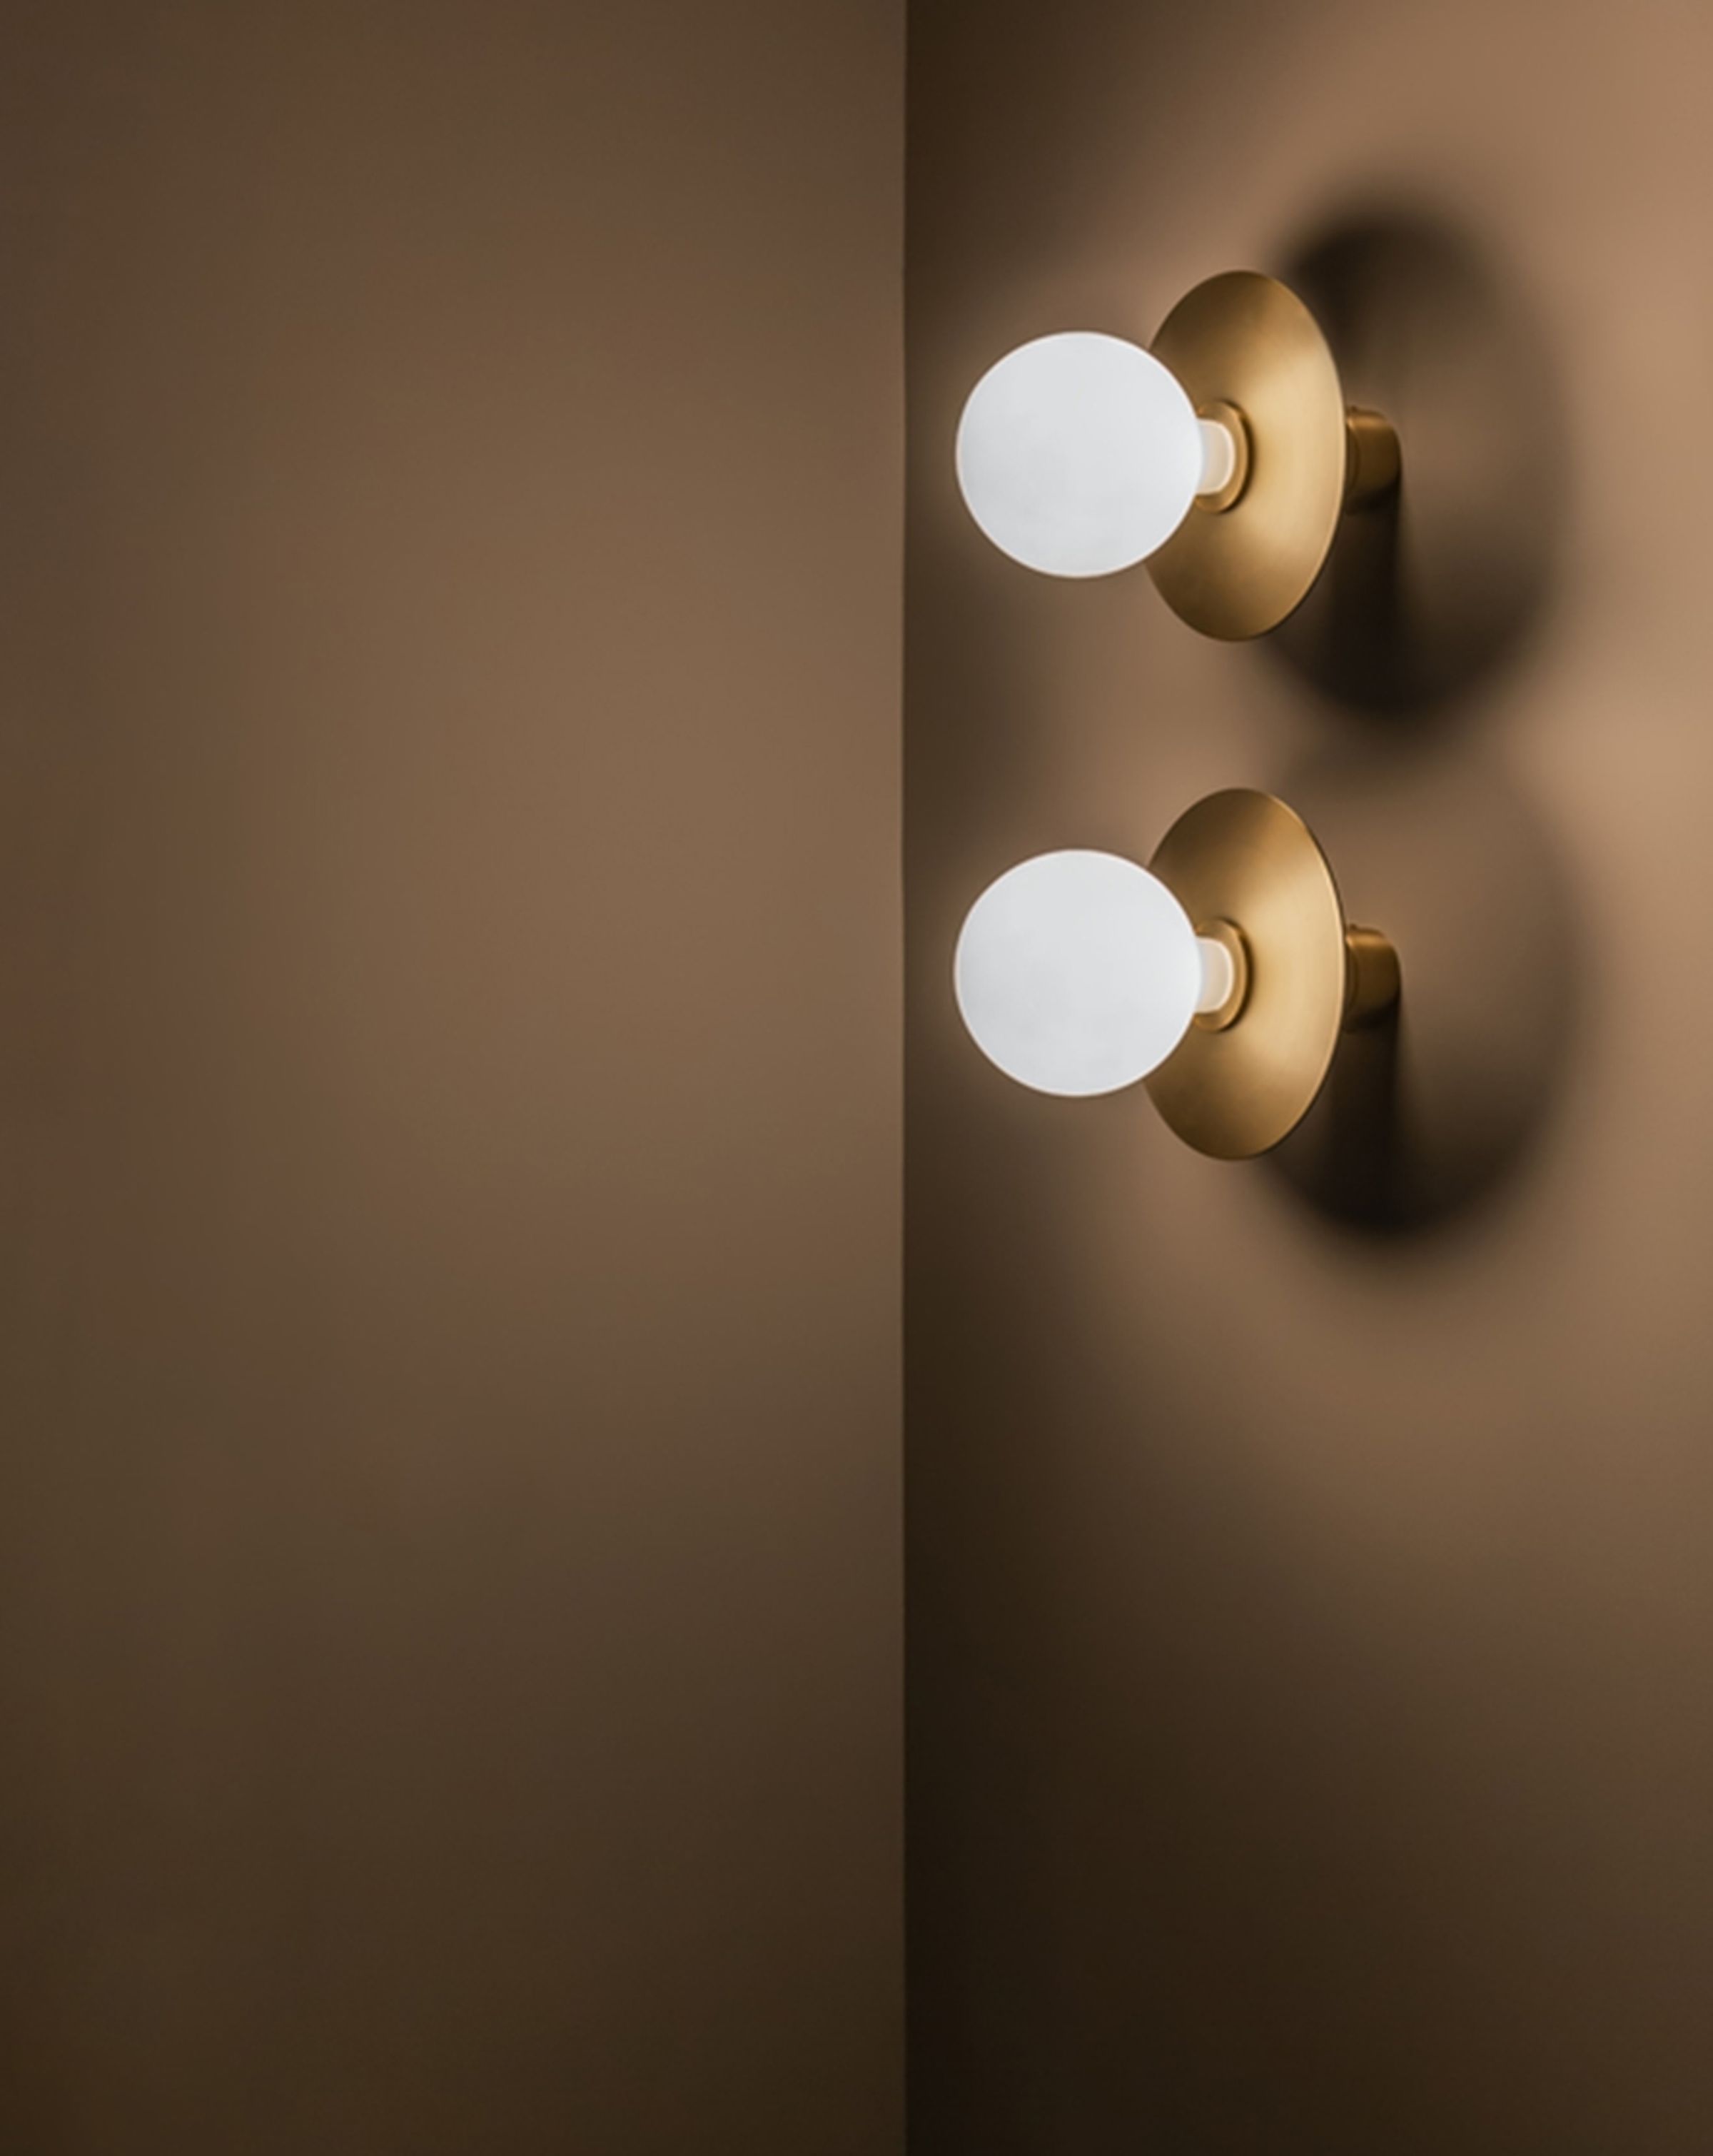 2 circular light bulbs with circular brass fixtures positioned virtually on a right brown wall